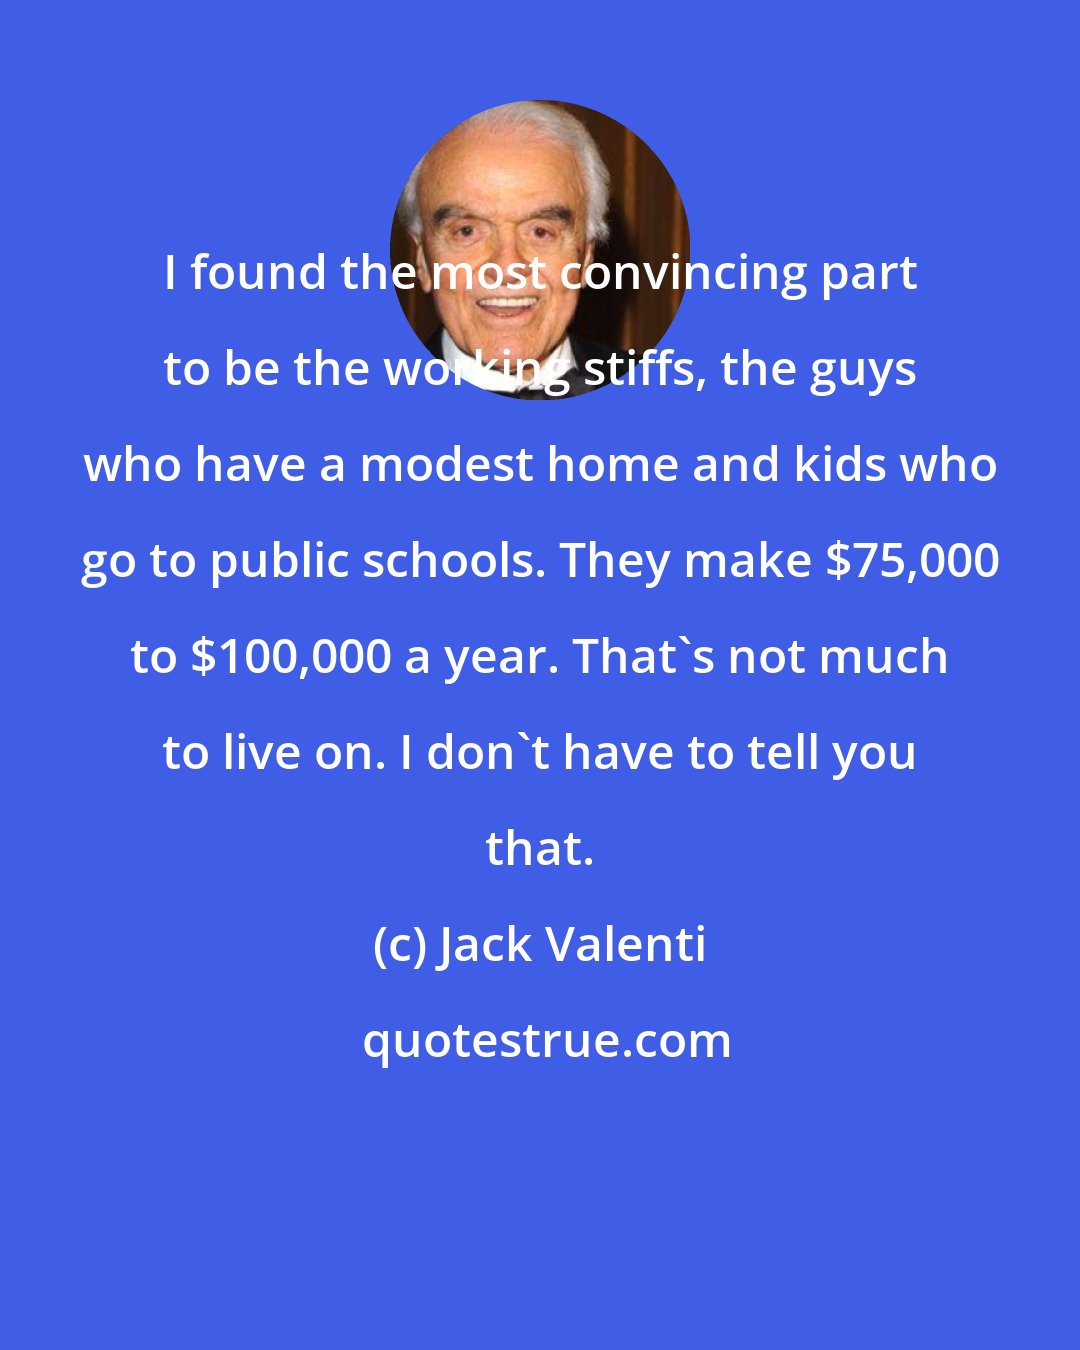 Jack Valenti: I found the most convincing part to be the working stiffs, the guys who have a modest home and kids who go to public schools. They make $75,000 to $100,000 a year. That's not much to live on. I don't have to tell you that.